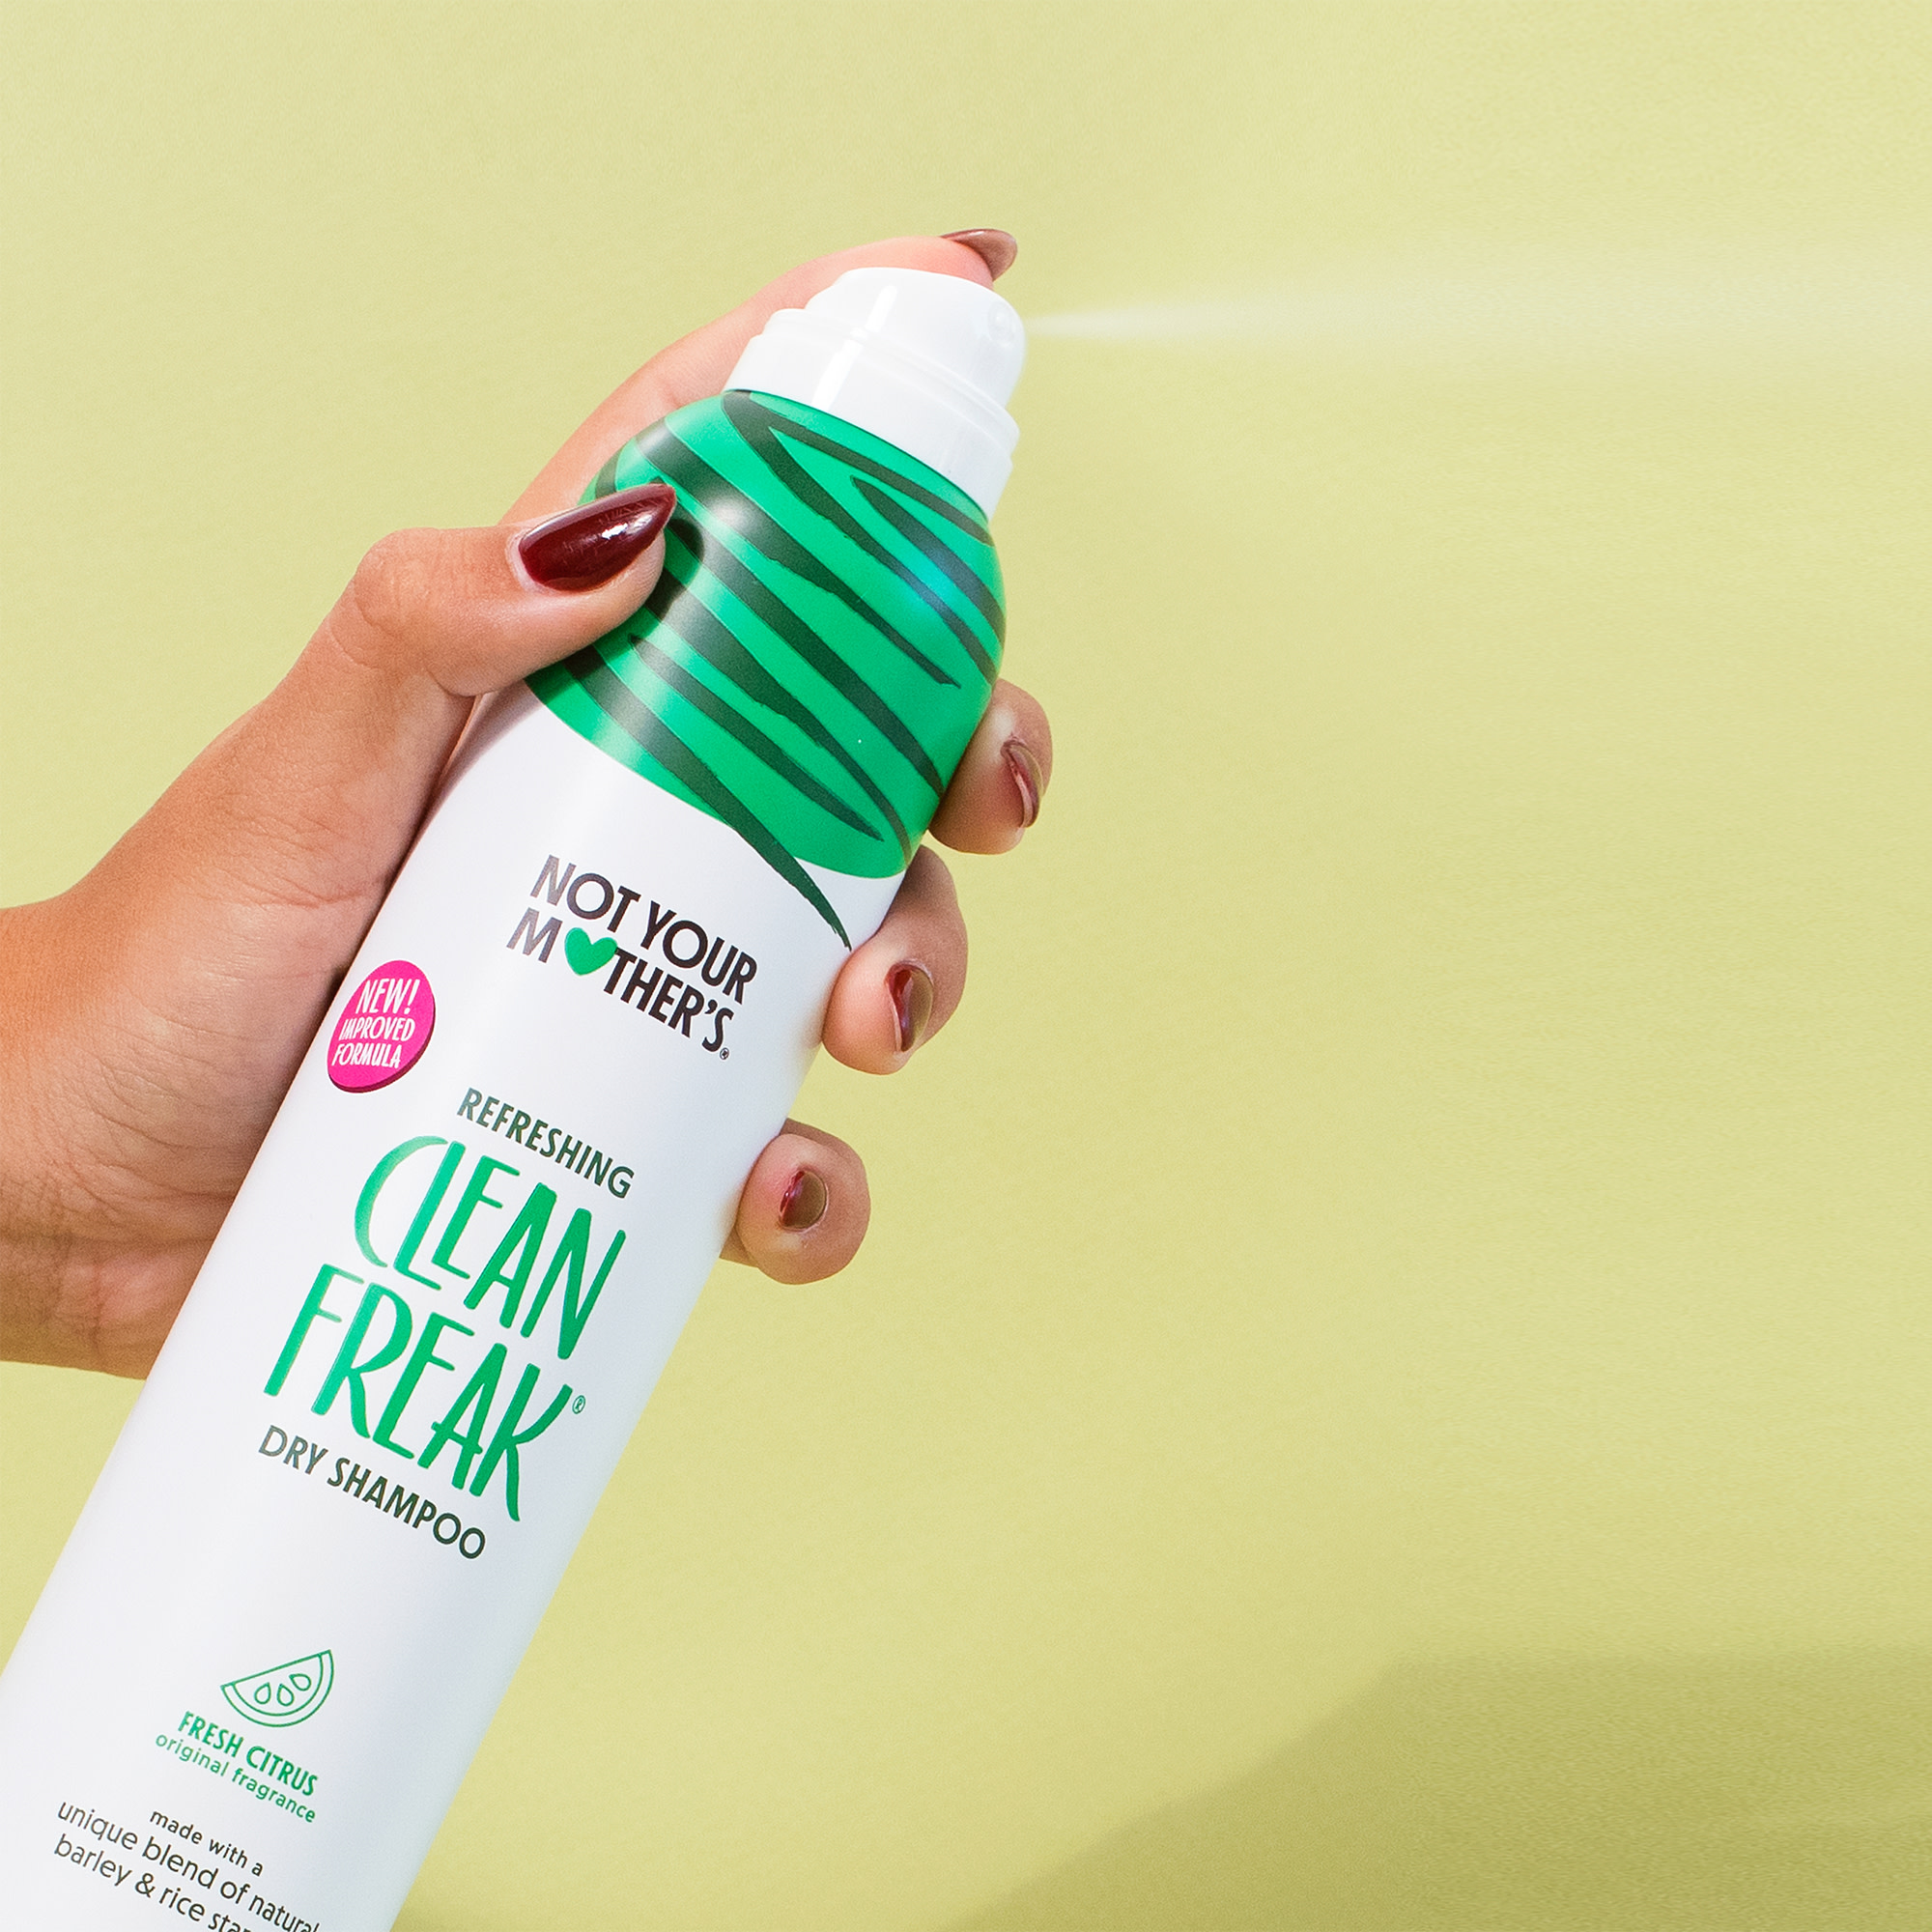 Not Your Mother's Clean Freak Refreshing Dry Shampoo, 7 oz - image 4 of 10